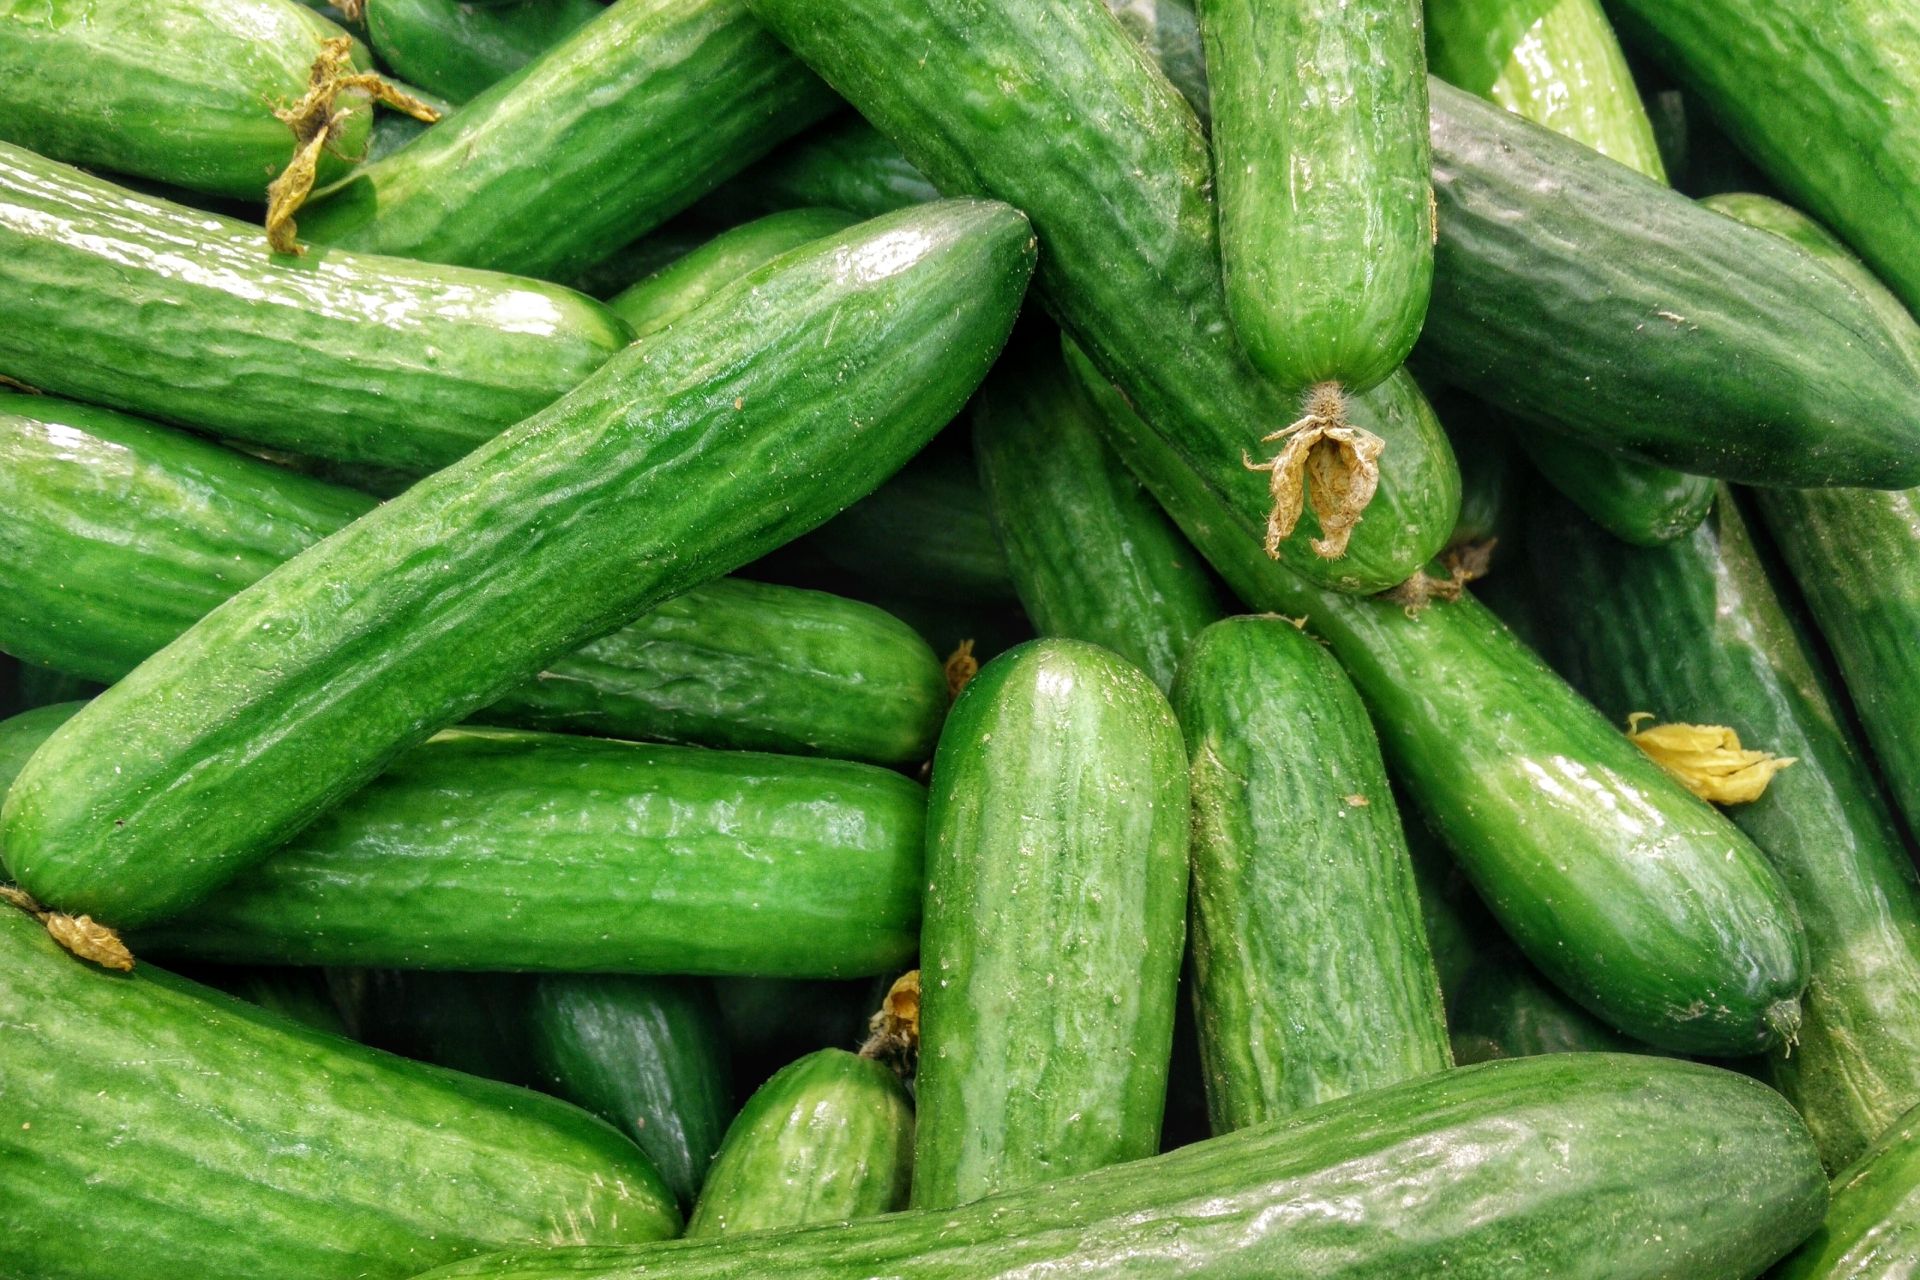 A Guide to the Different Types of Cucumbers, Cooking School